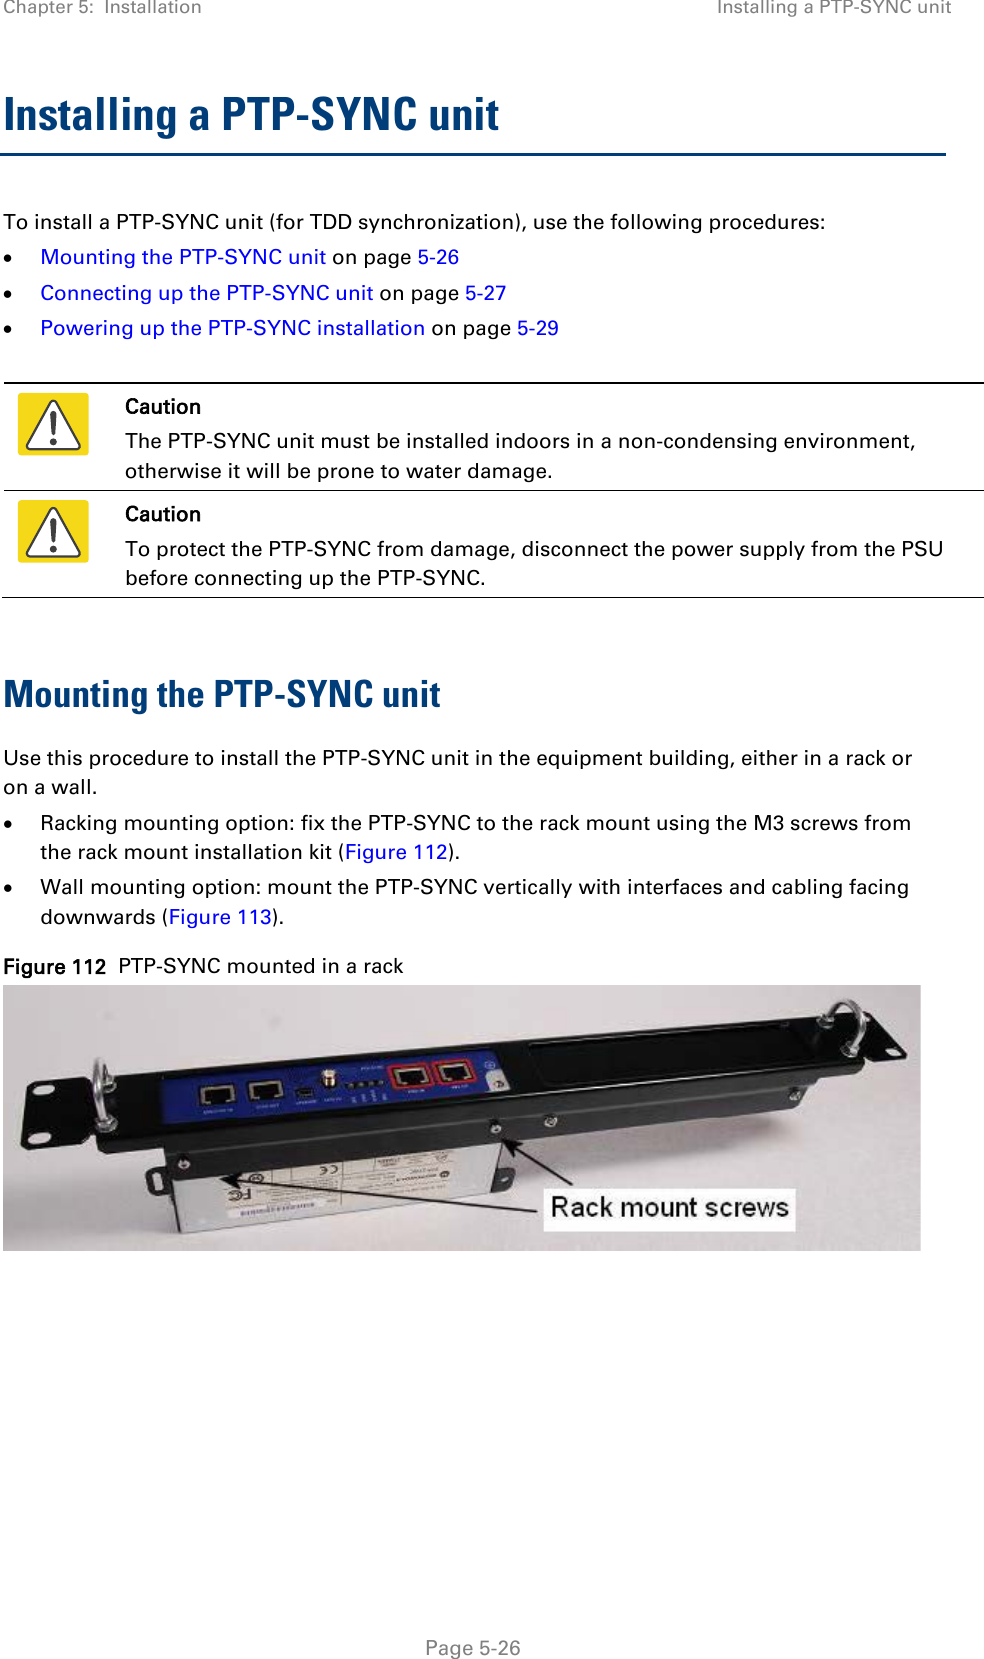 Chapter 5:  Installation Installing a PTP-SYNC unit  Installing a PTP-SYNC unit To install a PTP-SYNC unit (for TDD synchronization), use the following procedures: • Mounting the PTP-SYNC unit on page 5-26 • Connecting up the PTP-SYNC unit on page 5-27 • Powering up the PTP-SYNC installation on page 5-29   Caution The PTP-SYNC unit must be installed indoors in a non-condensing environment, otherwise it will be prone to water damage.  Caution To protect the PTP-SYNC from damage, disconnect the power supply from the PSU before connecting up the PTP-SYNC.  Mounting the PTP-SYNC unit Use this procedure to install the PTP-SYNC unit in the equipment building, either in a rack or on a wall. • Racking mounting option: fix the PTP-SYNC to the rack mount using the M3 screws from the rack mount installation kit (Figure 112). • Wall mounting option: mount the PTP-SYNC vertically with interfaces and cabling facing downwards (Figure 113). Figure 112  PTP-SYNC mounted in a rack    Page 5-26 